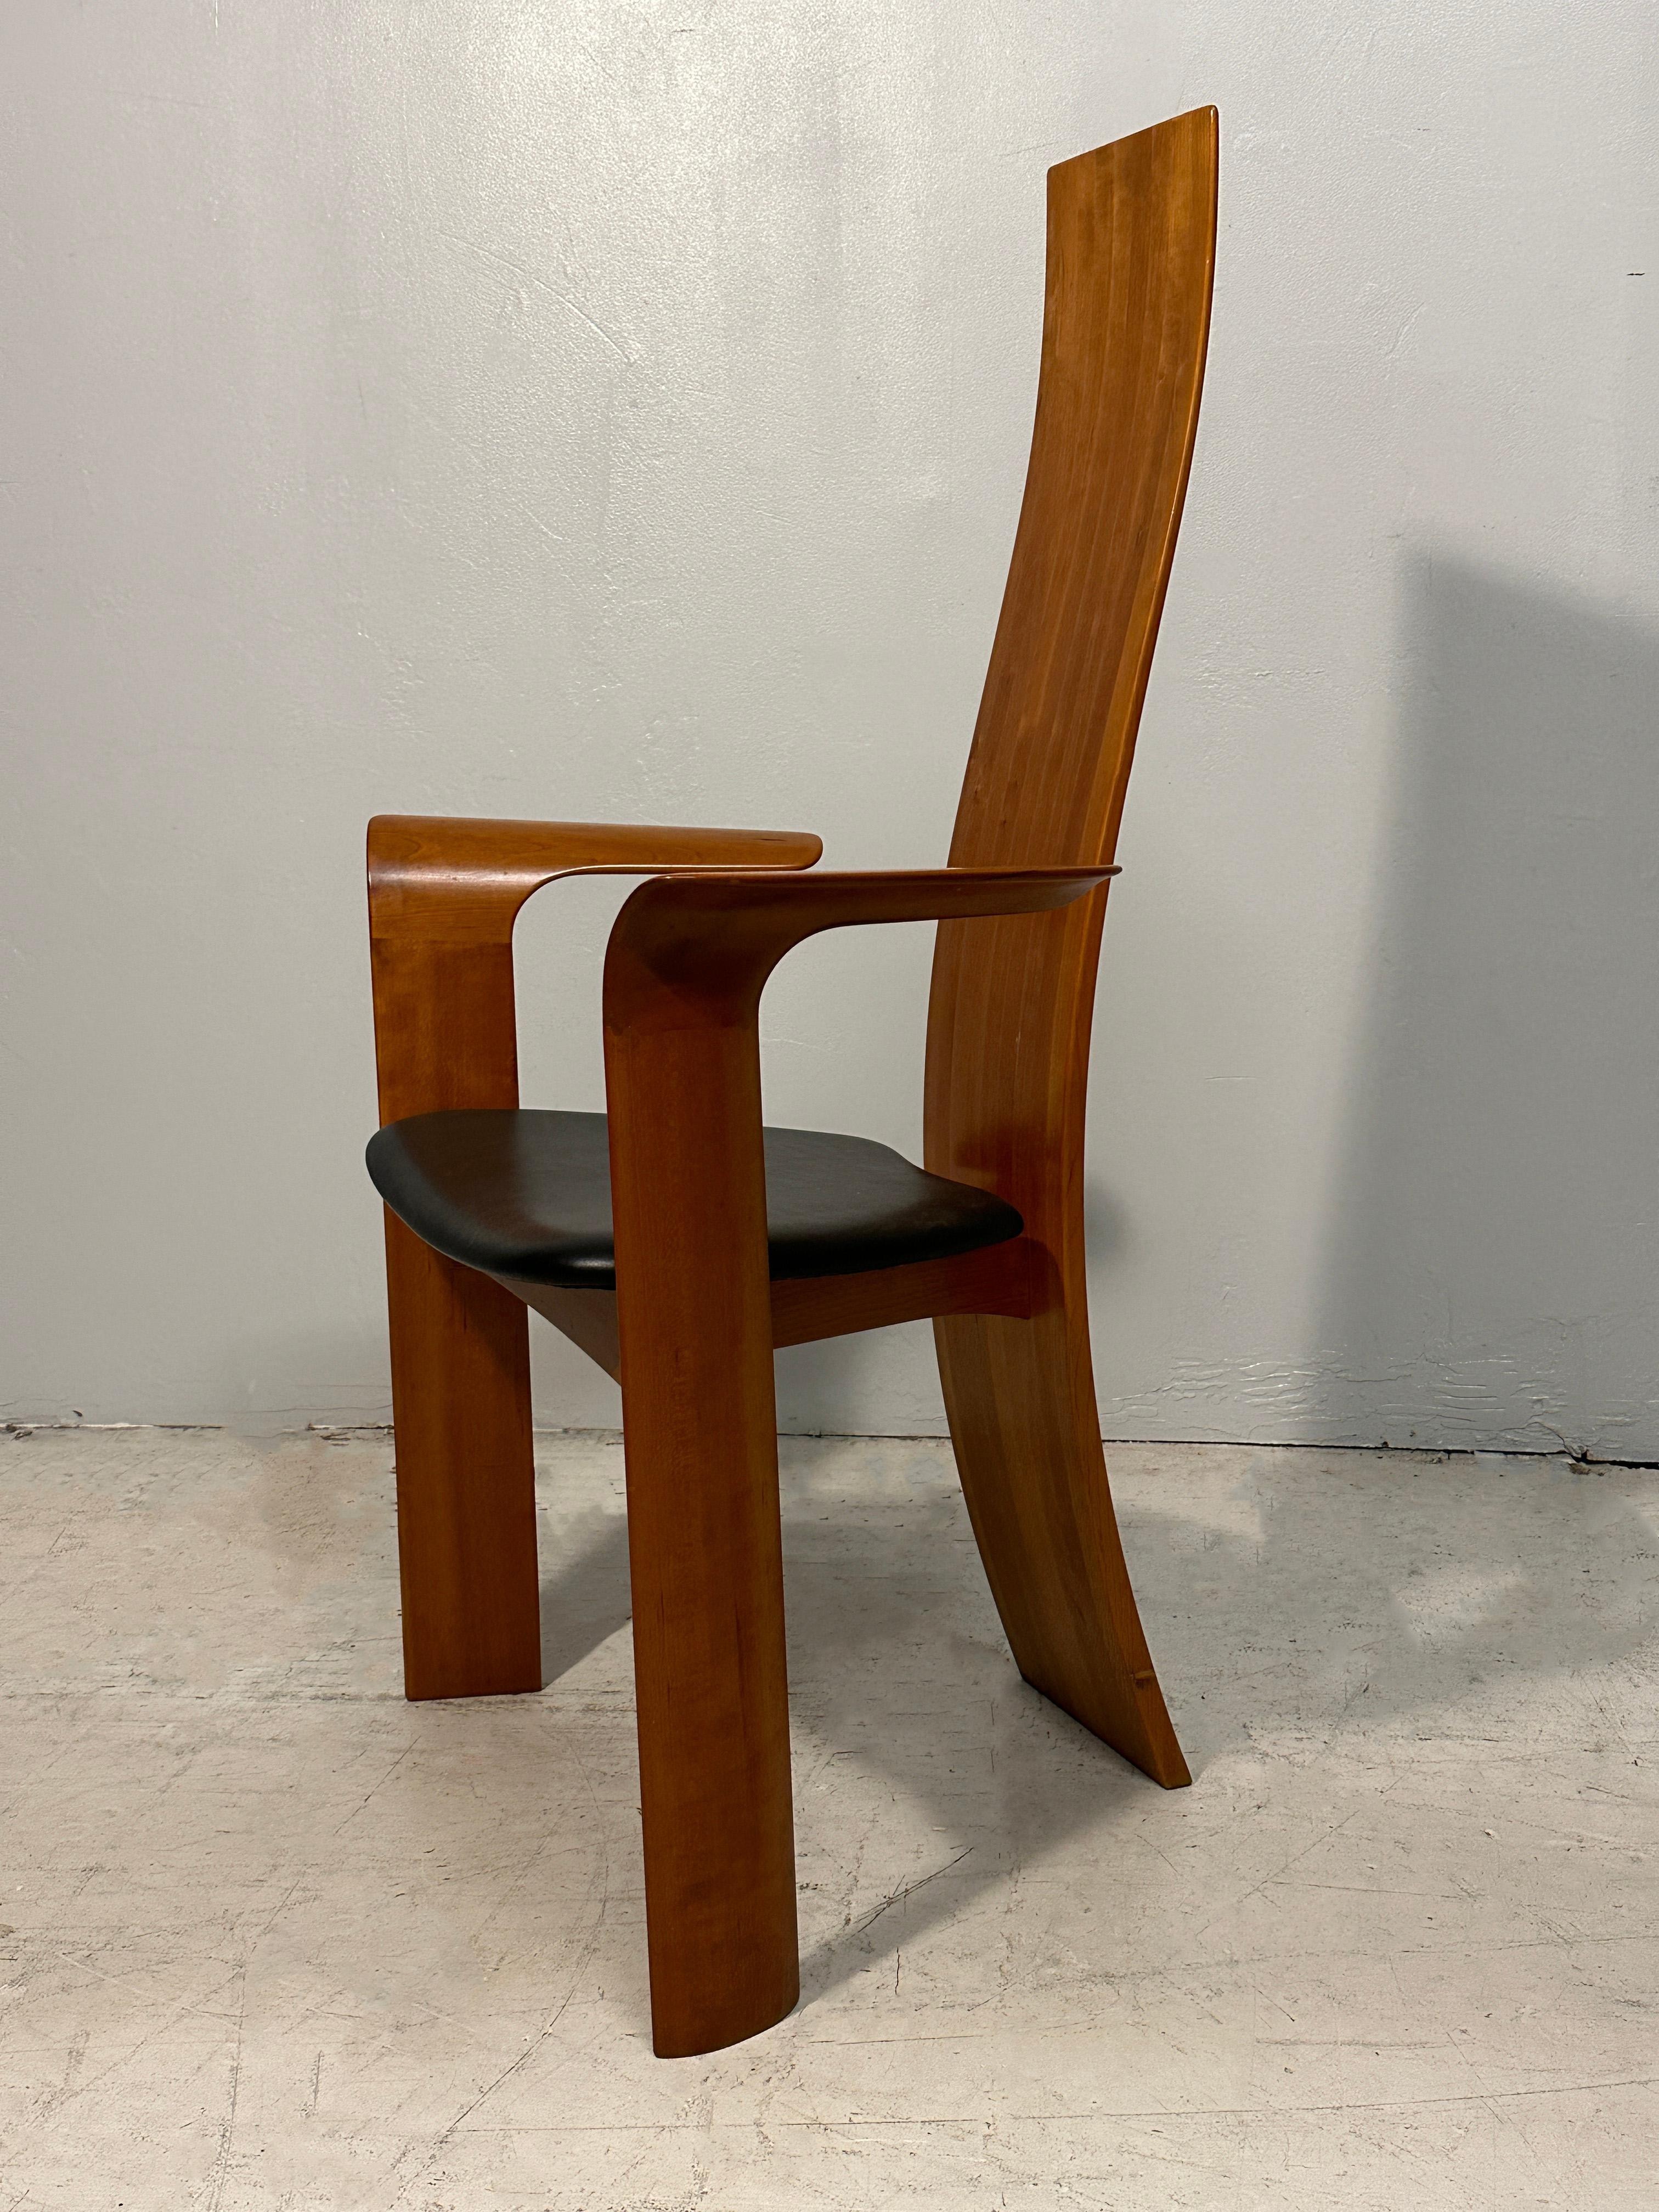 These impressive high-back dining chairs have teak legs and base, and their back juxtaposes different wood stripes: cherry, oak, walnut, and teak. The seats are upholstered in black leather.
The two armchairs and four side chairs identify as the